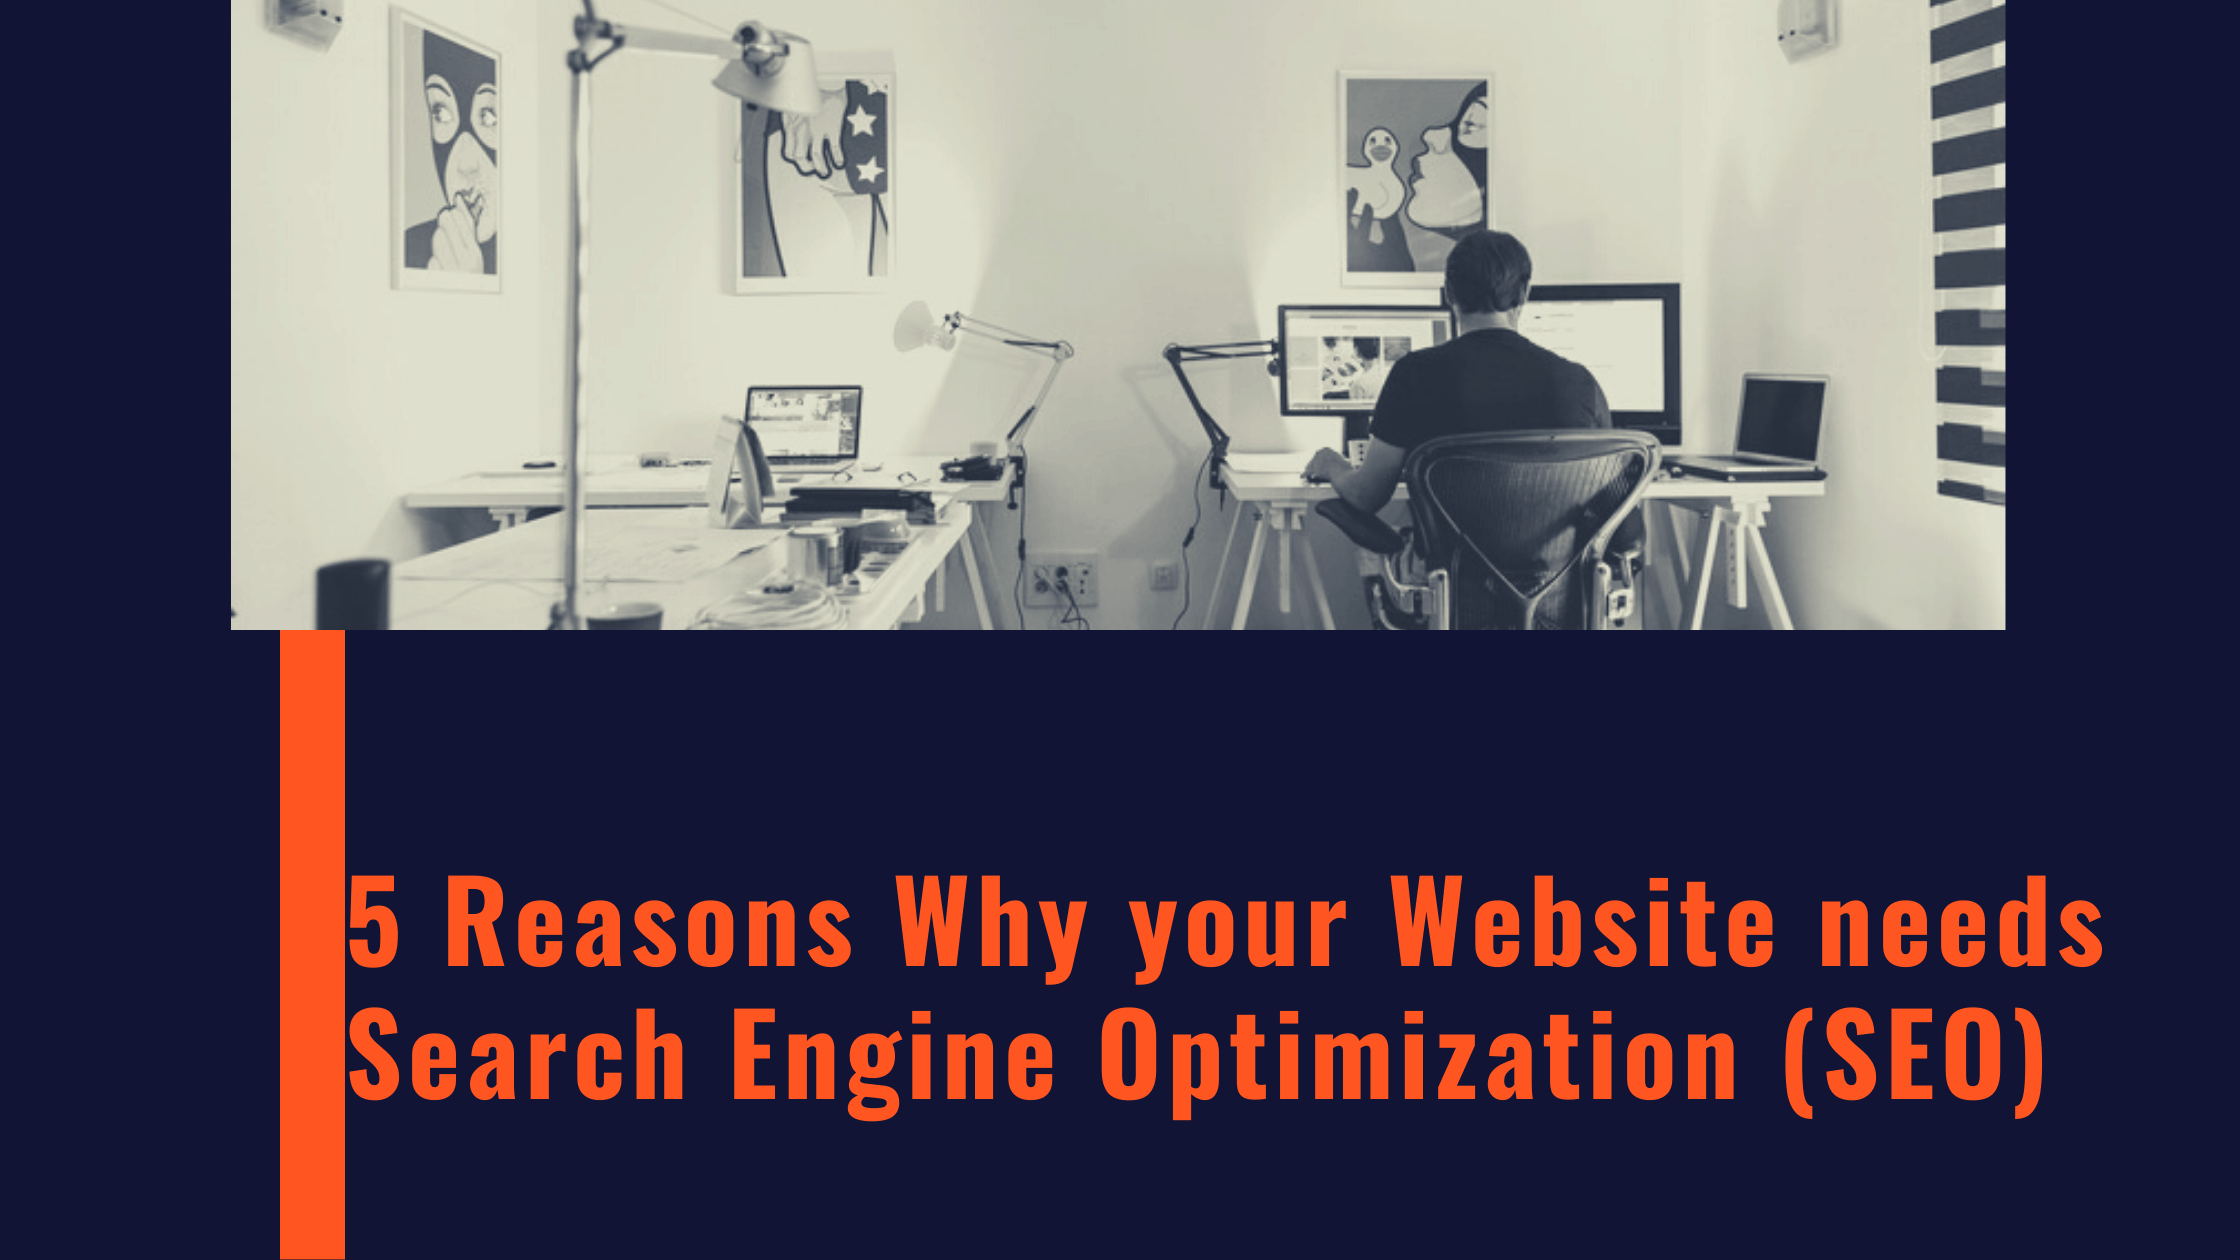 5 Reasons Why Your Website Need Search Engine Optimization